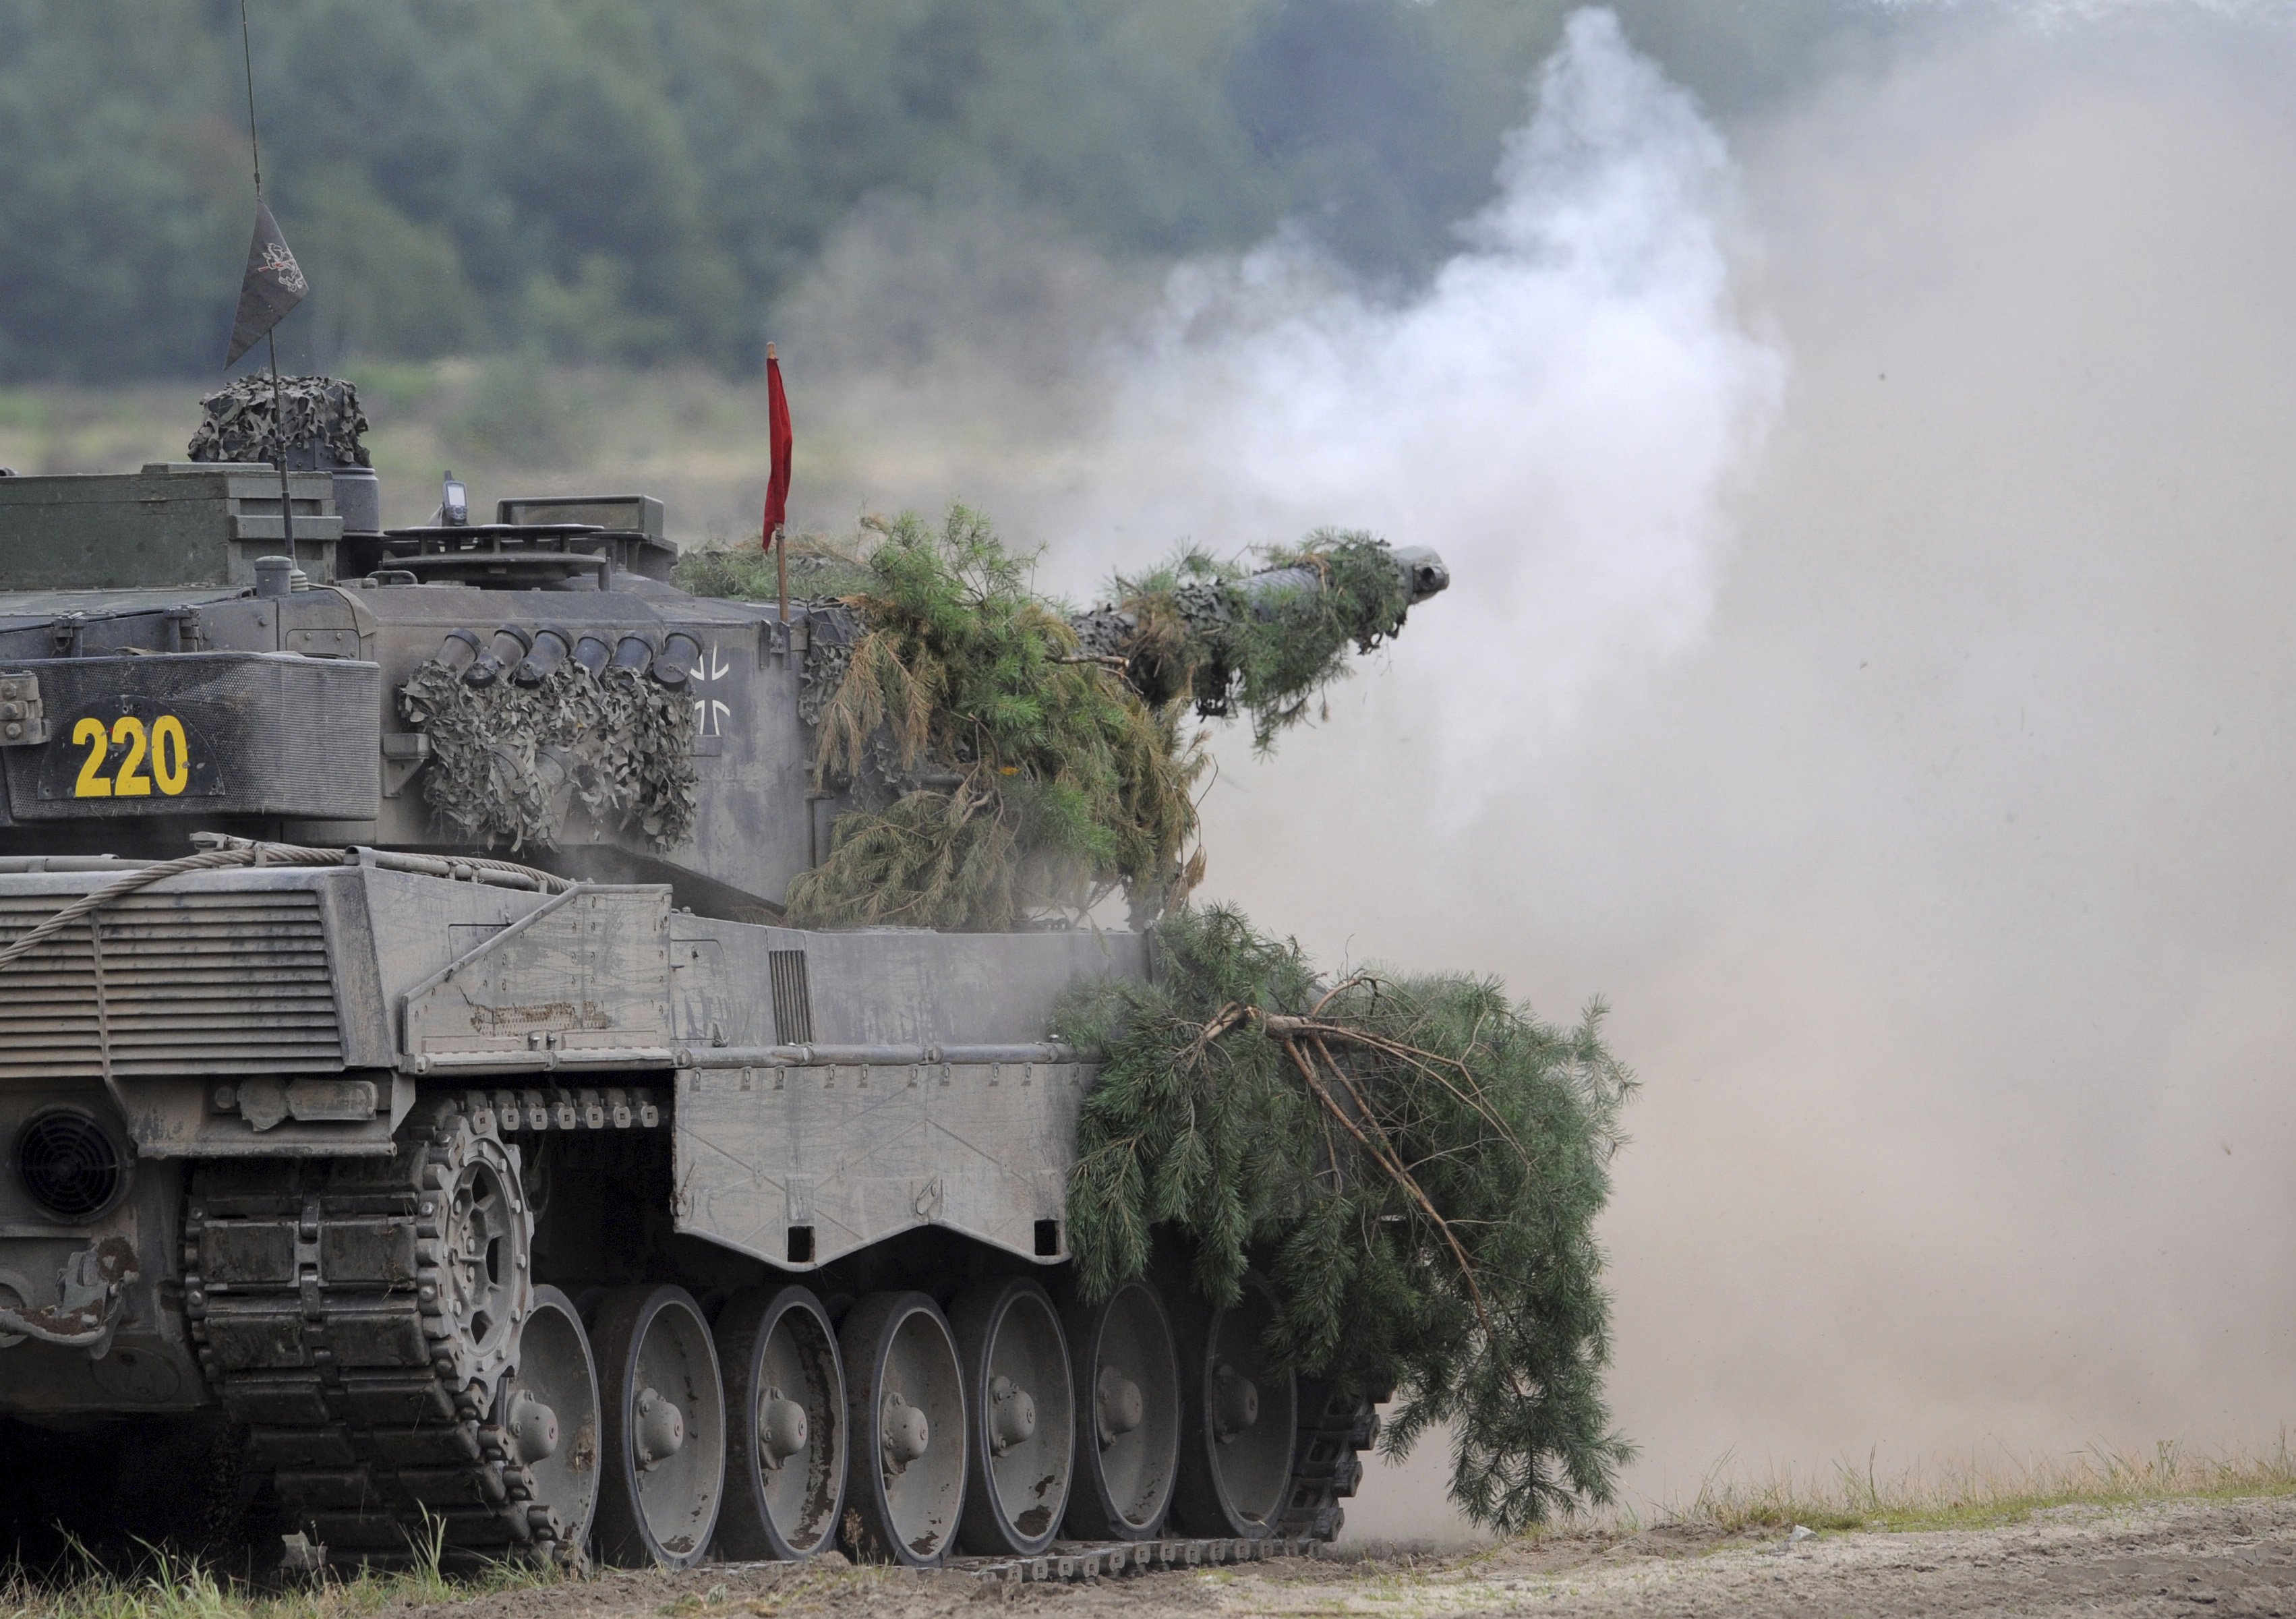 A Leopard tank type 2A6 that belongs to the Bundeswehr reserve, seen on August 12, 2009, in Weisskeissel, Germany.